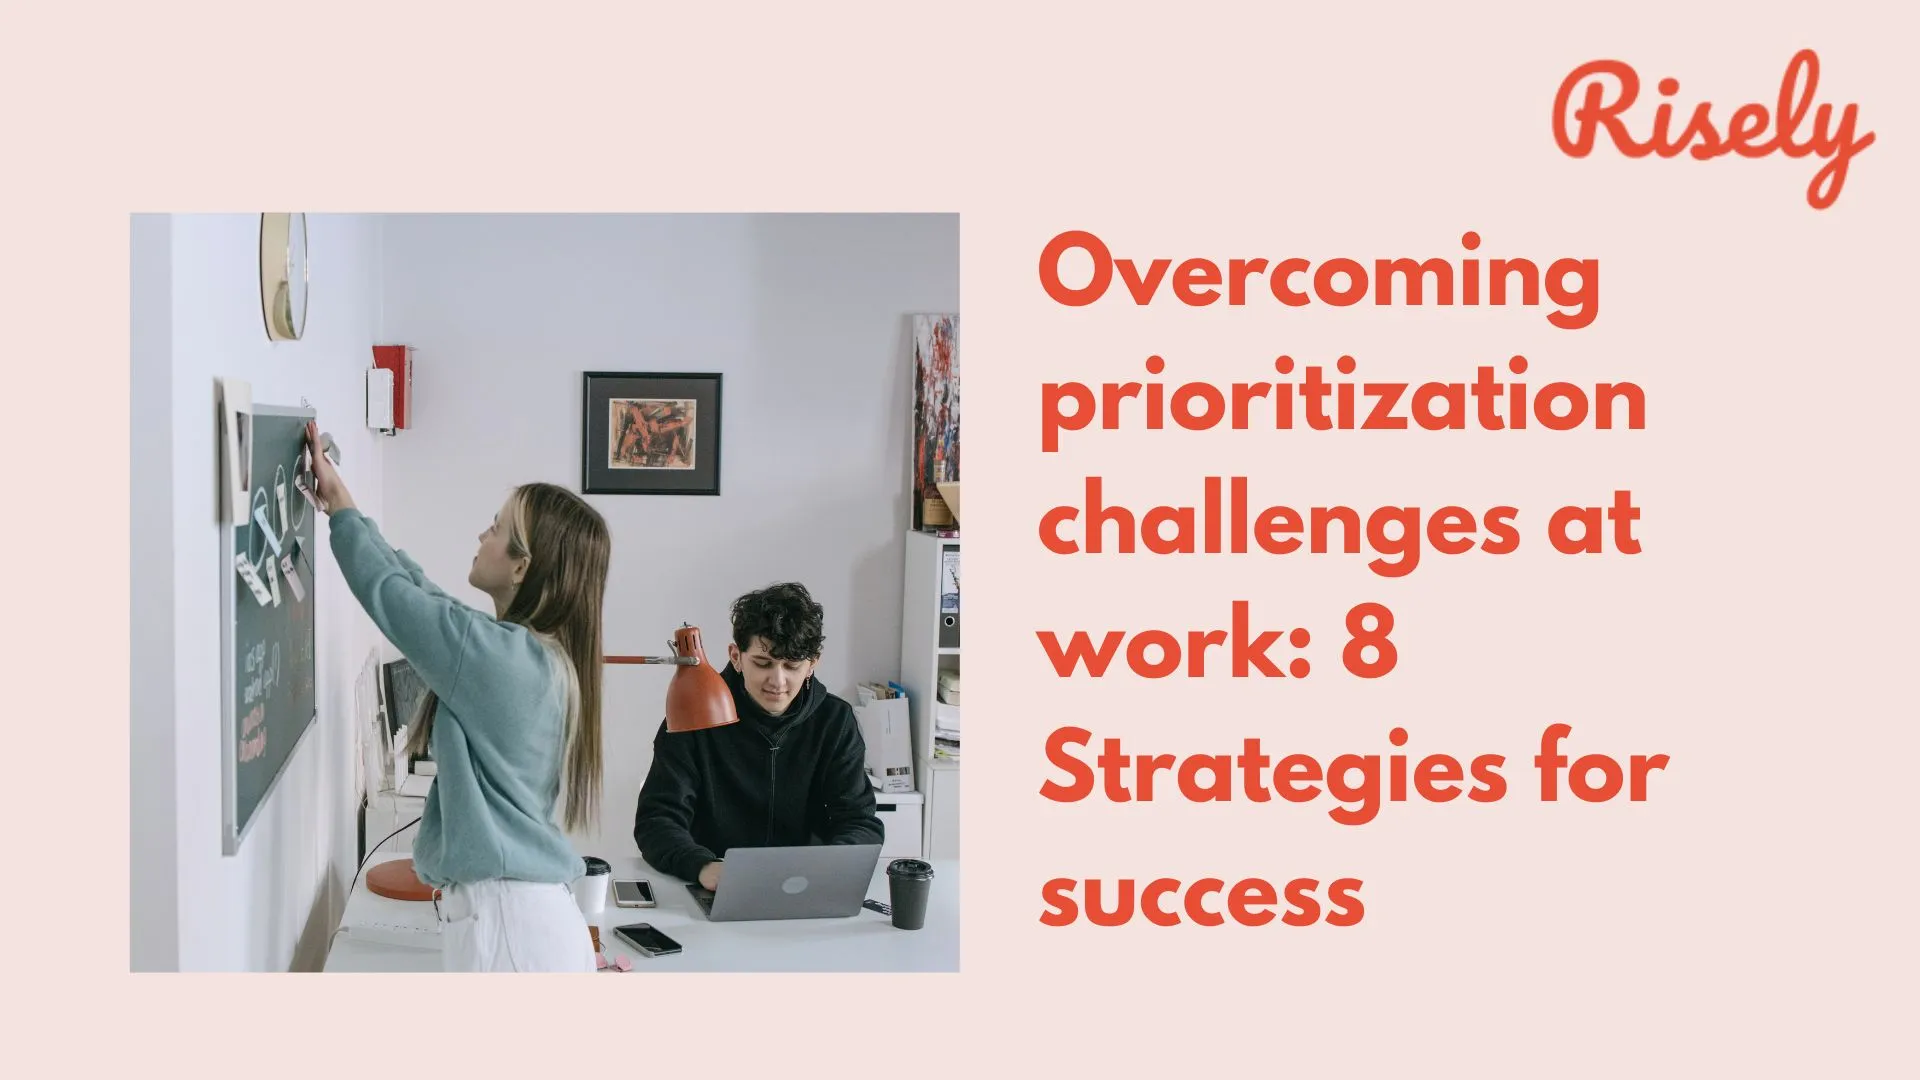 Overcoming prioritization challenges at work: 8 Strategies for success